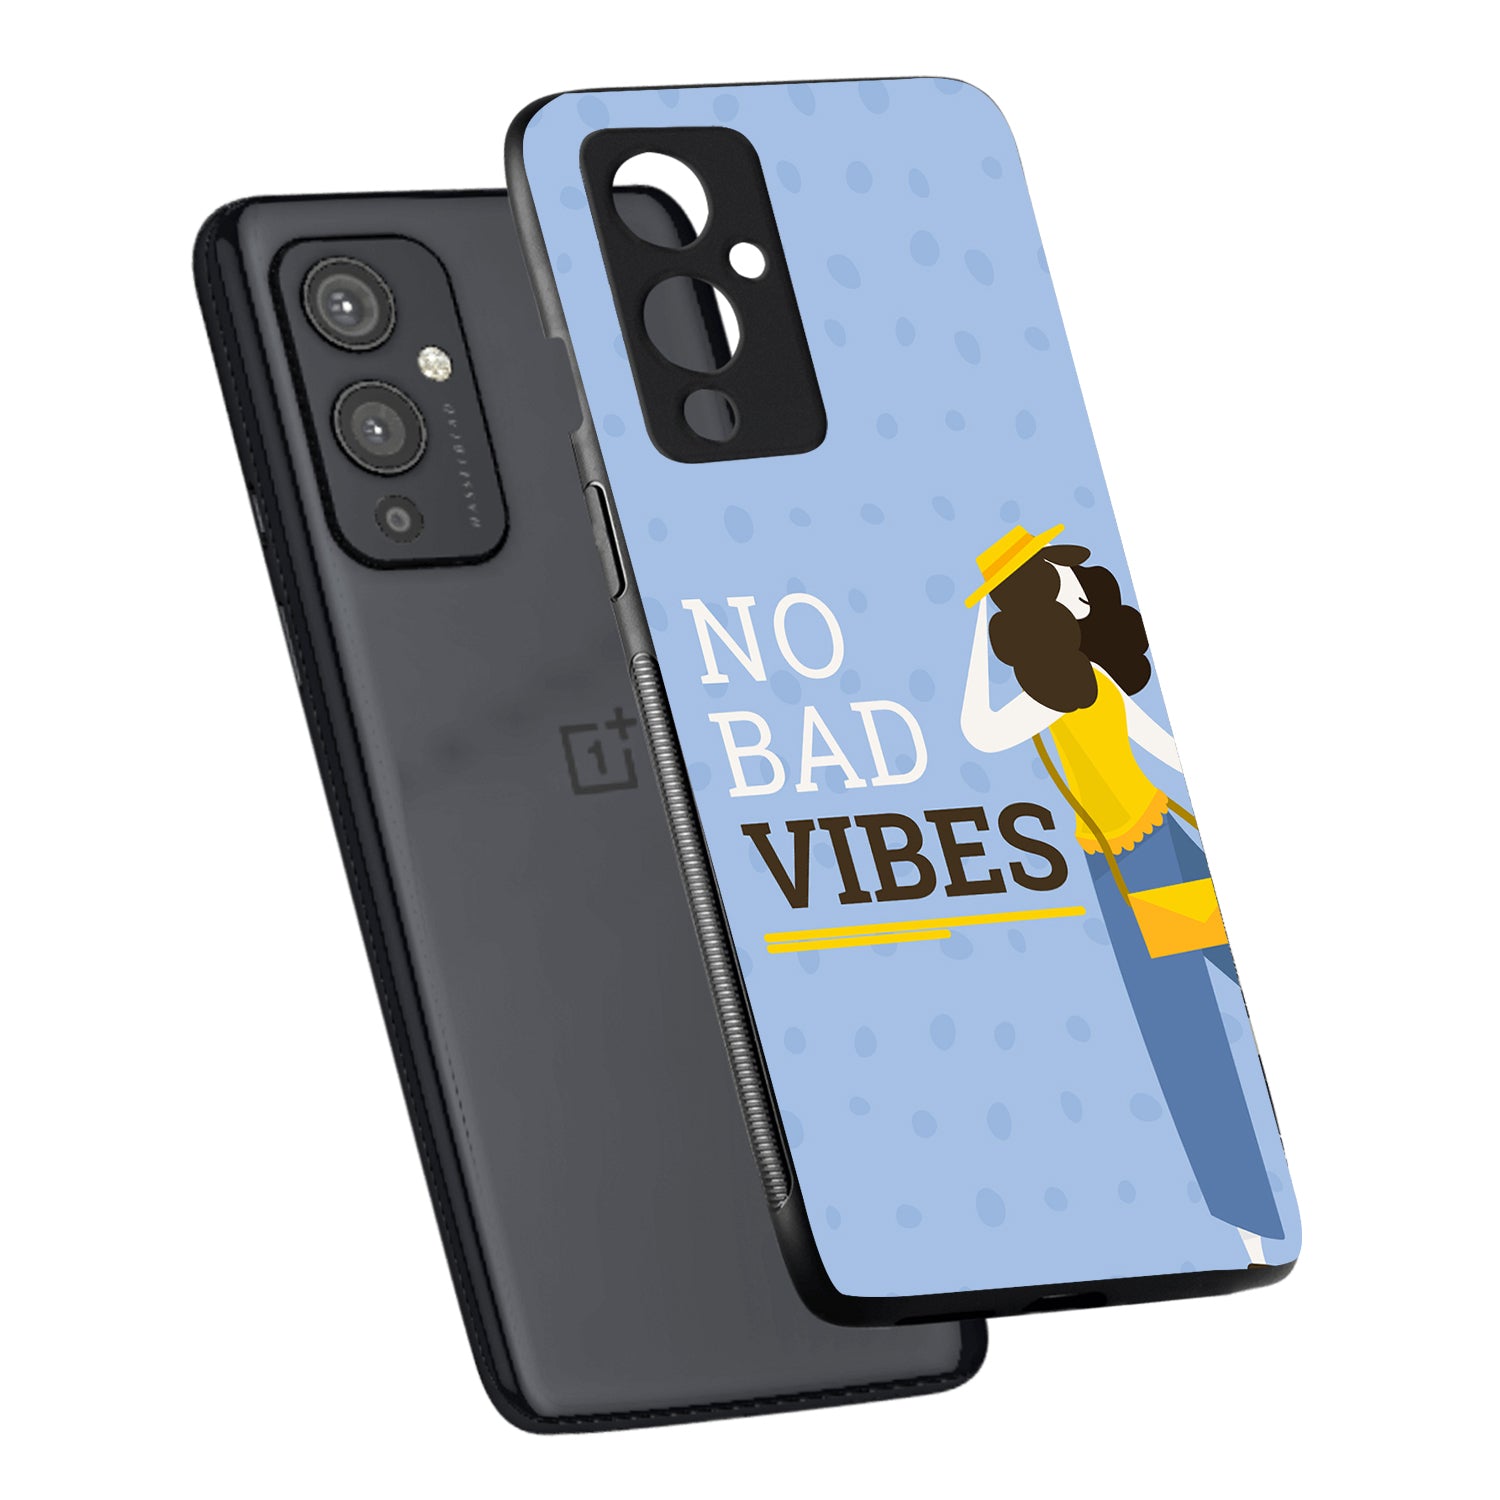 No Bad Vibes Motivational Quotes Oneplus 9 Back Case